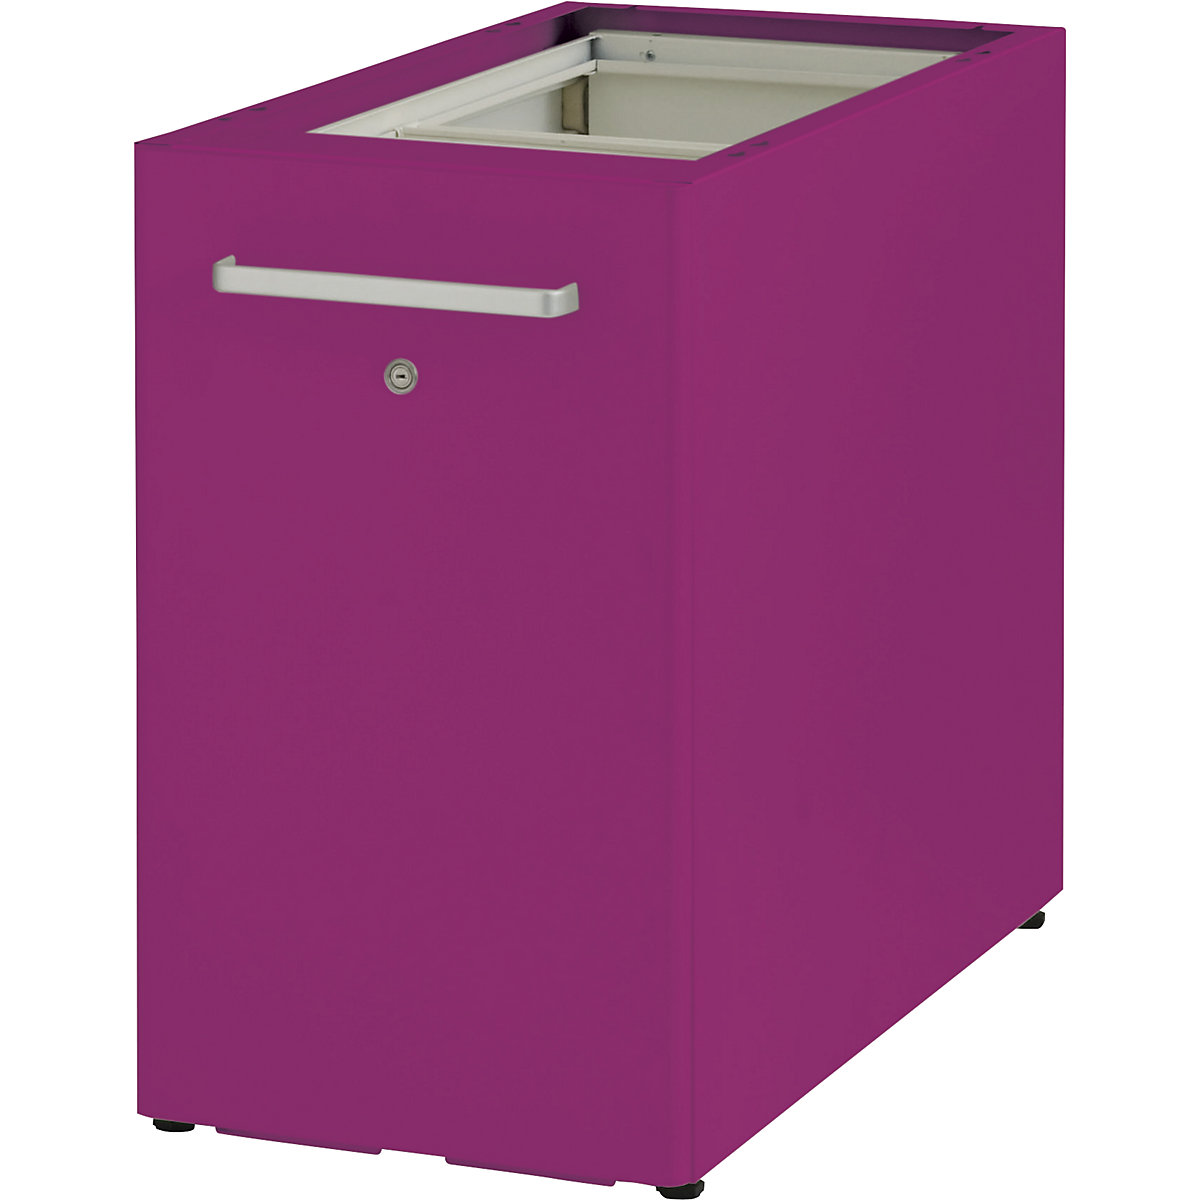 Tower™ 2 add-on furniture, without worktop, with pin board – BISLEY, for the right side, with 1 shelf, fuchsia-8